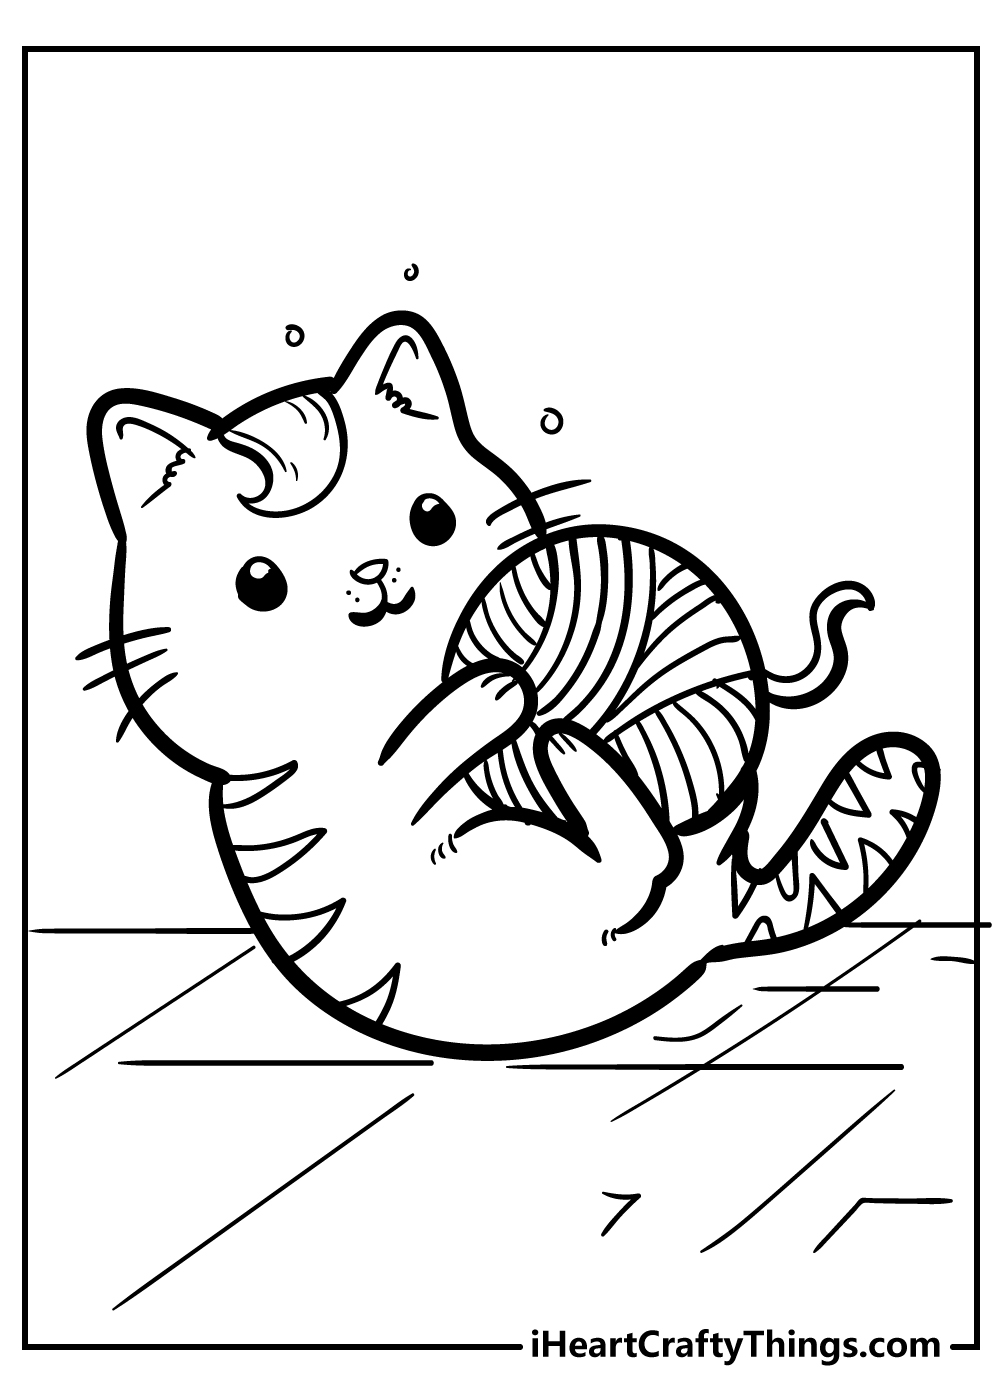 20 Kitten Coloring Pages Updated 20